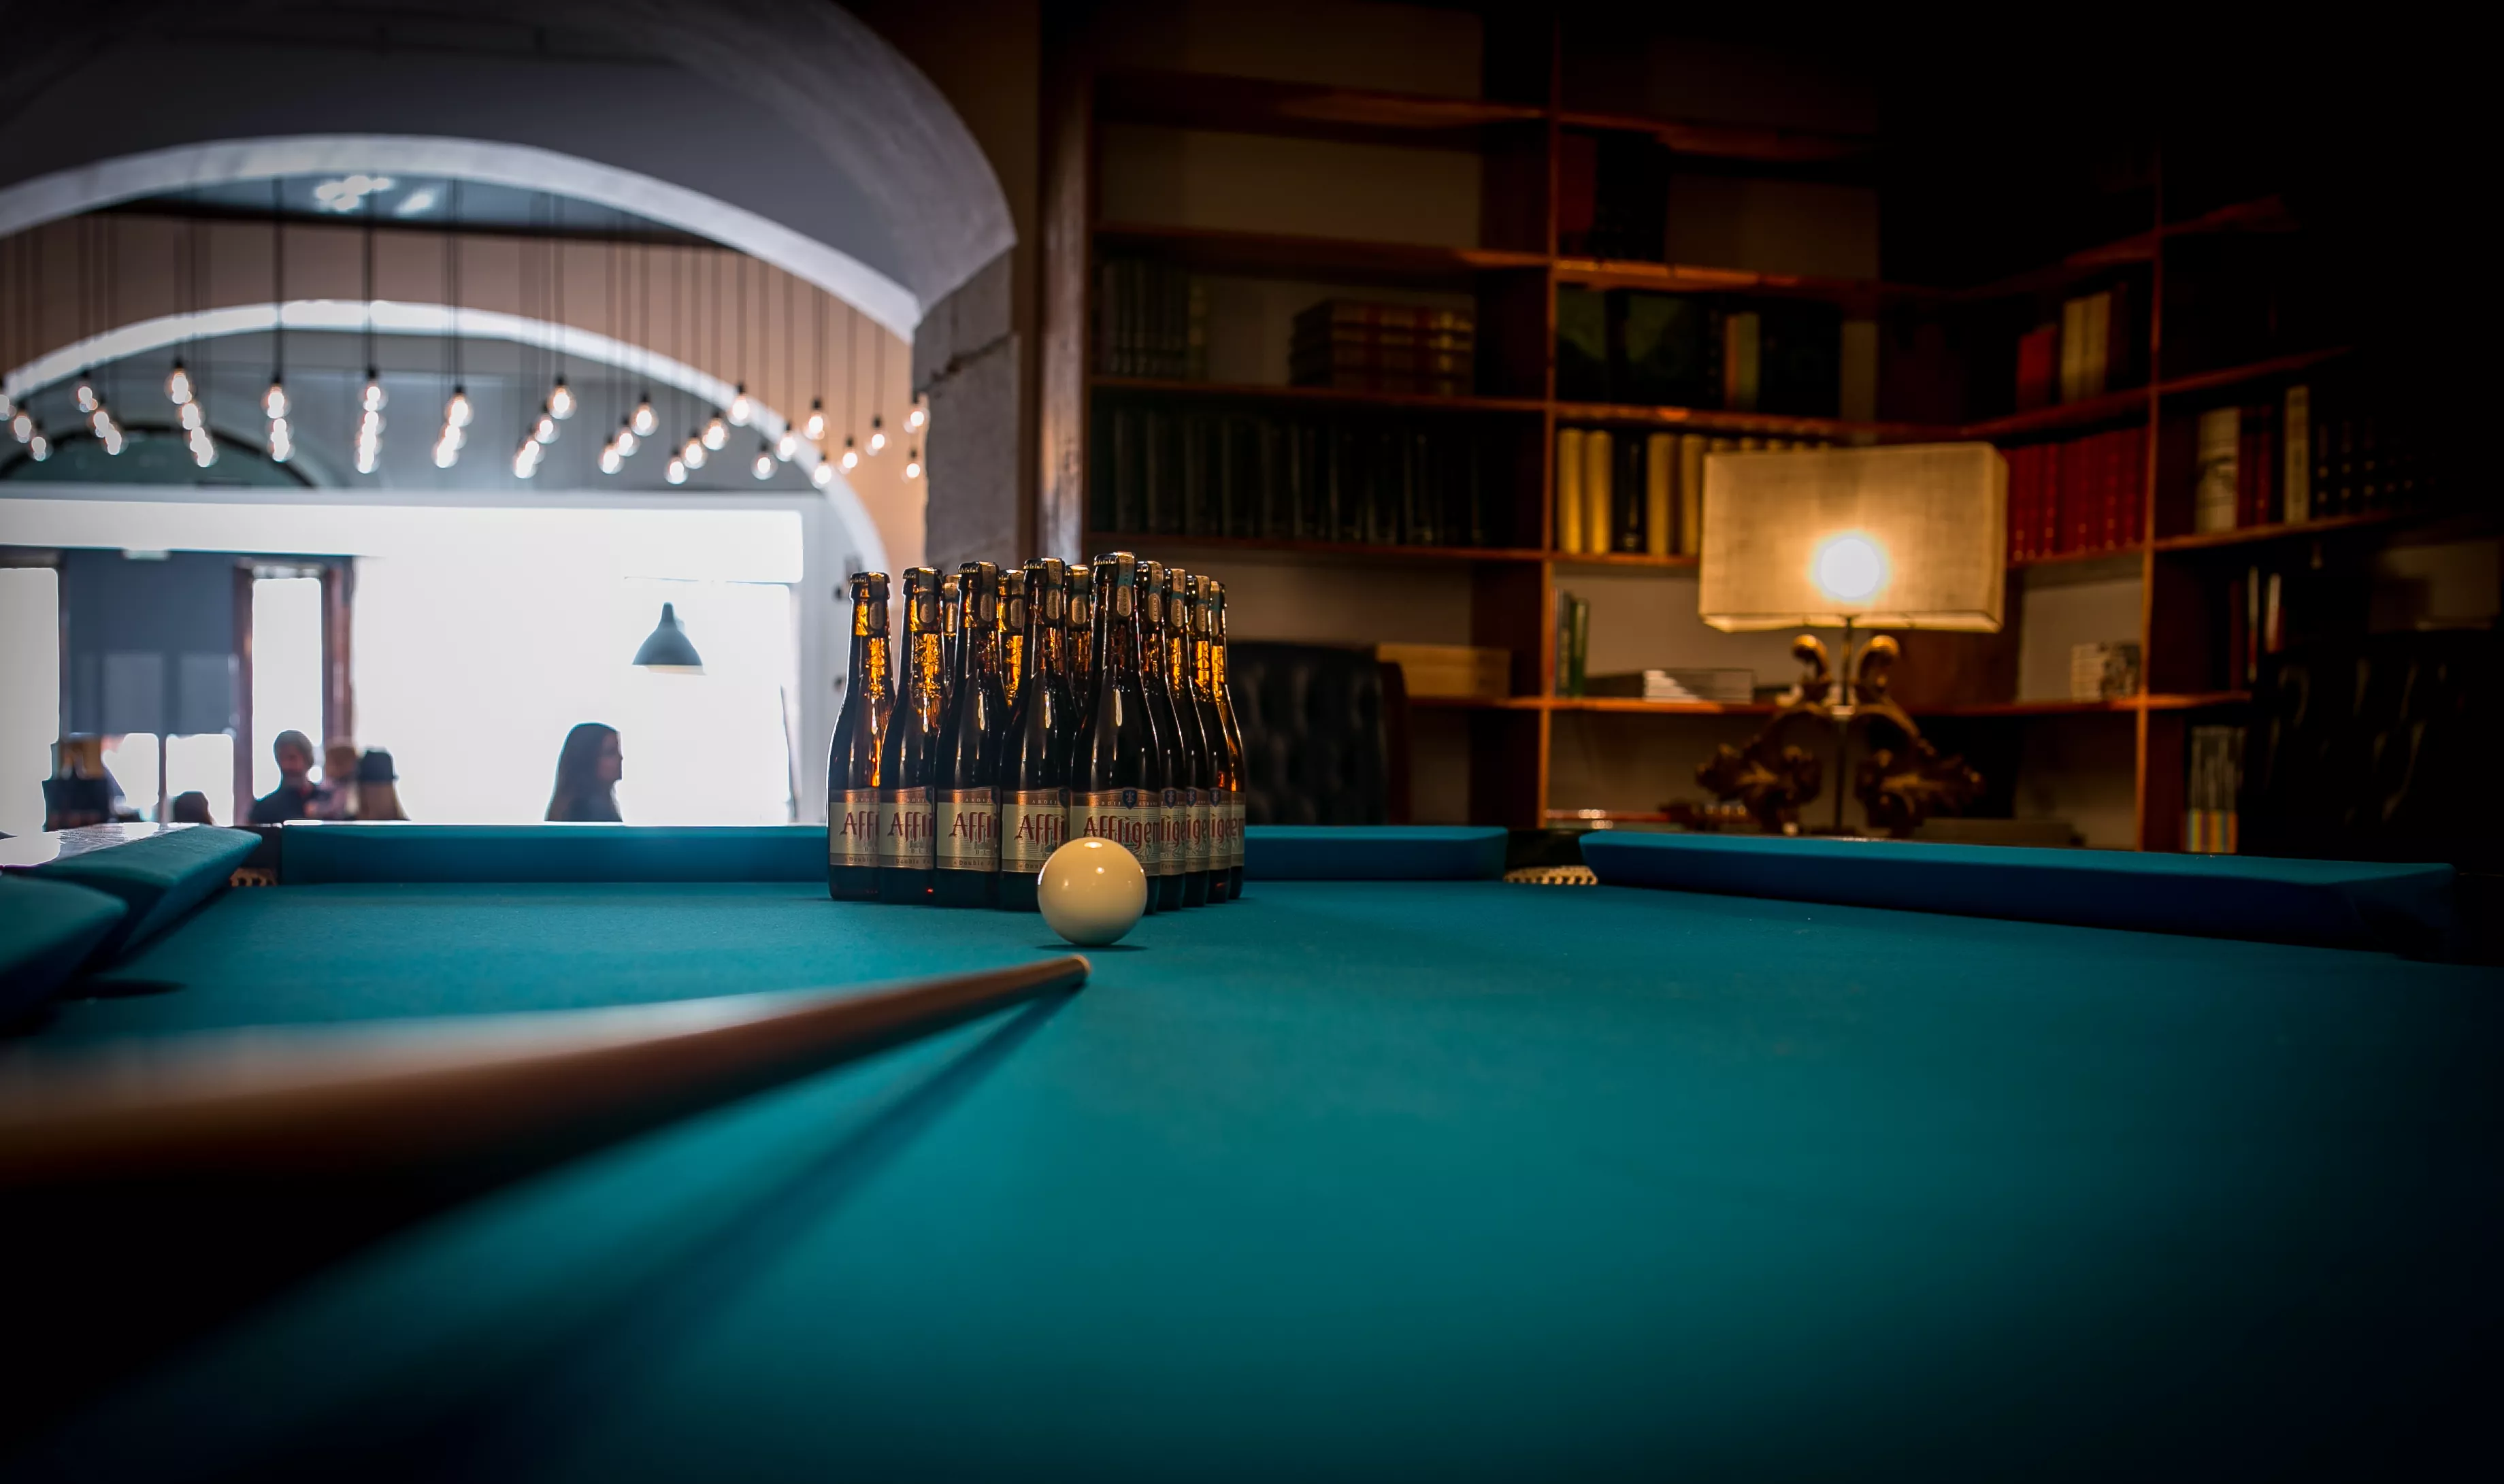 O Purista in Portugal, Europe | Bars,Billiards - Rated 3.8